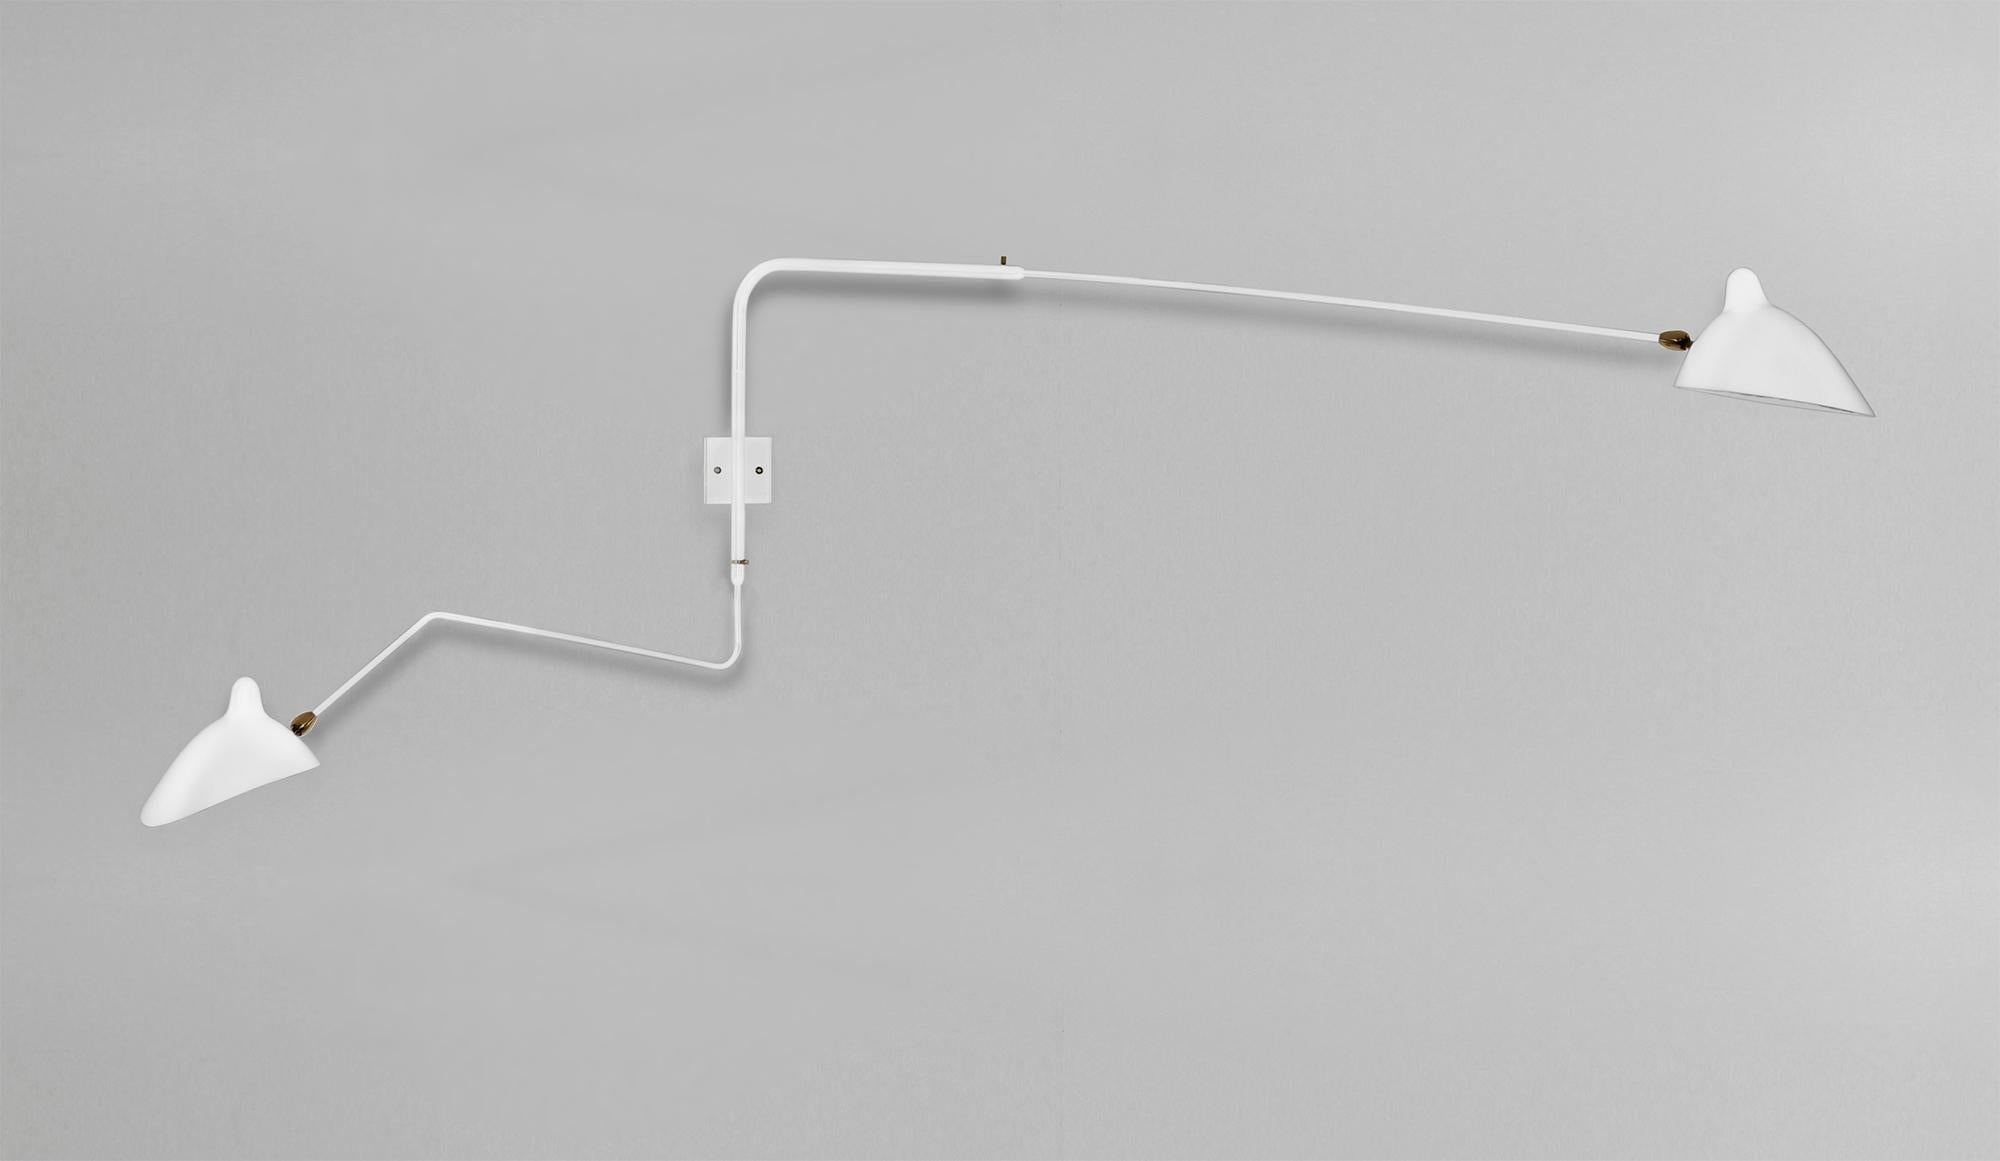 The long straight arm of this sconce is 69 inches allowing for illumination deeper into a room when needed while the shorter arm maintains lighting closer to the wall. Maximum Flexibility is achieved with independently rotating arms and swiveling